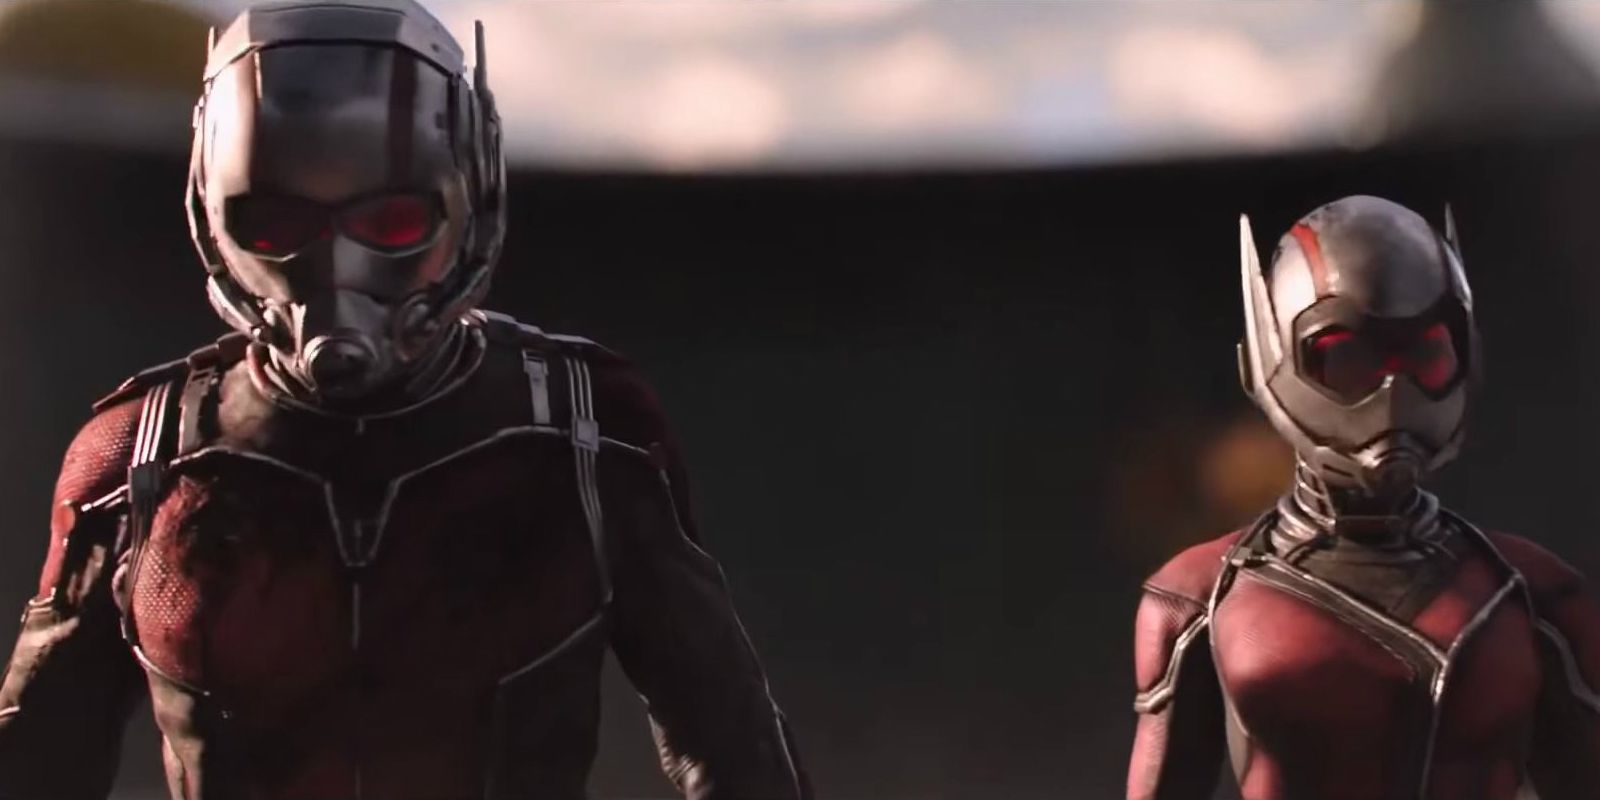 Ant-Man and the Wasp prologue with Hank Pym and Janet van Dyne on a mission